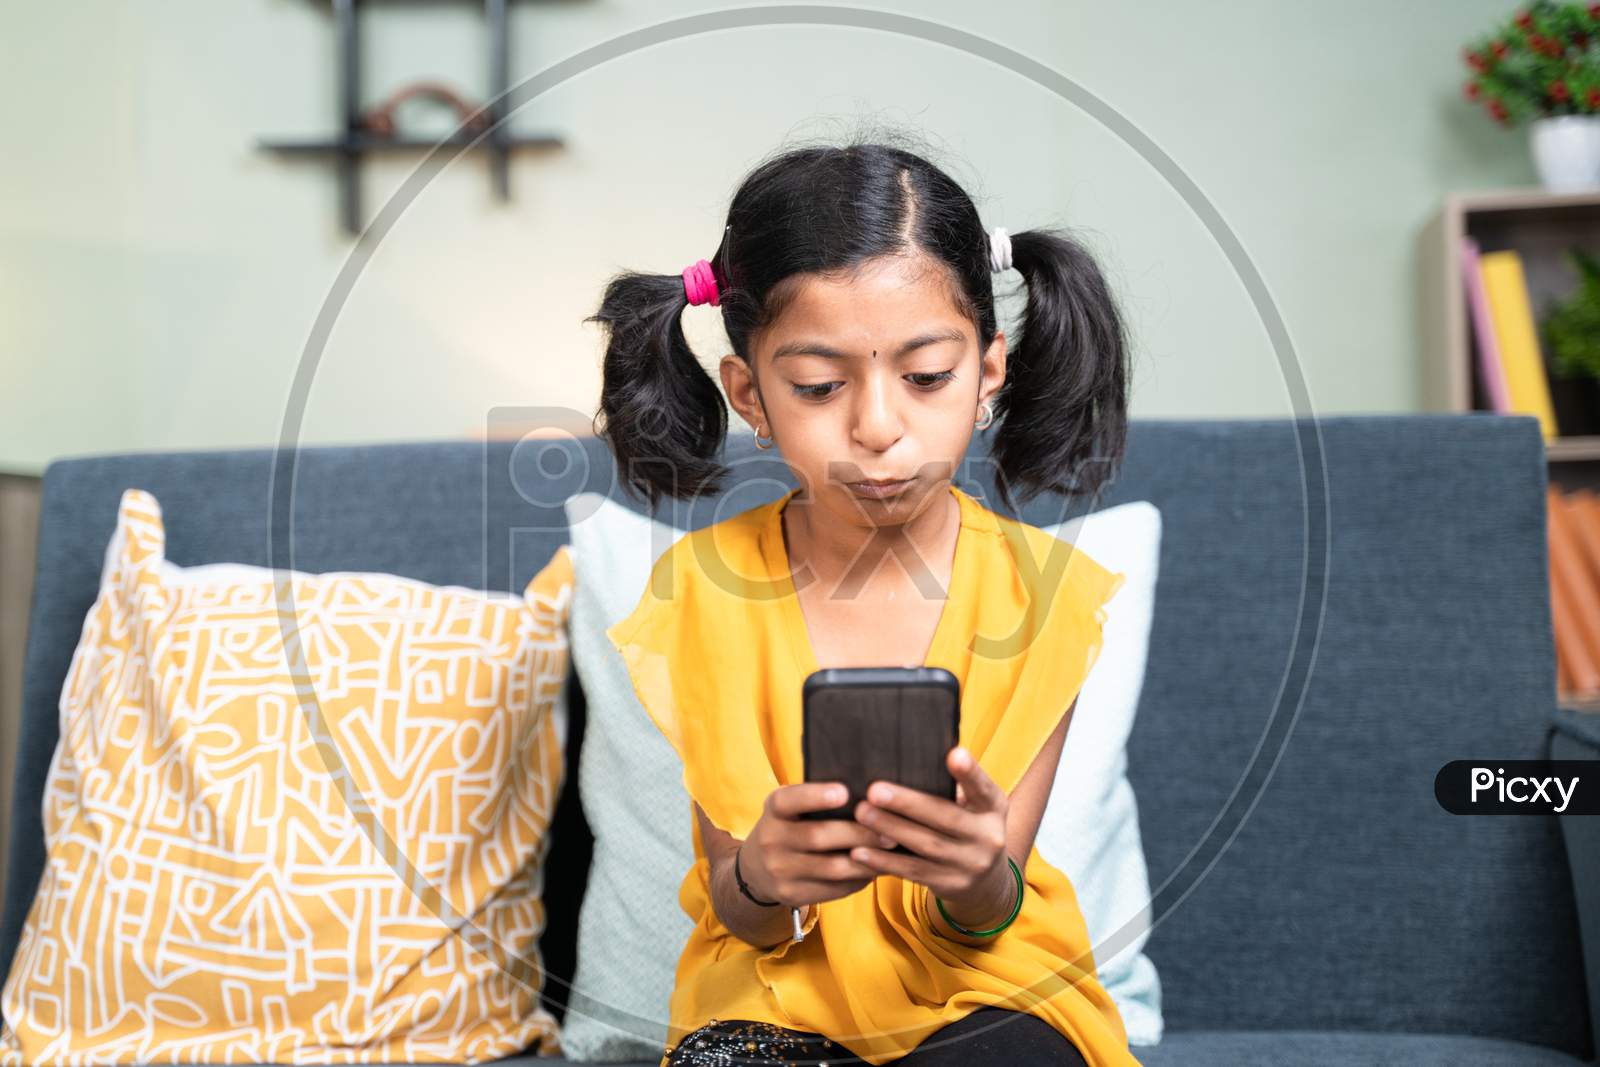 Young Girl Kid Using Mobile Phone While Sitting On Sofa In Bending Head Posture - Concept Of Kid Mobile Phone Game Addiction, Technology And Modern Lifestyle.